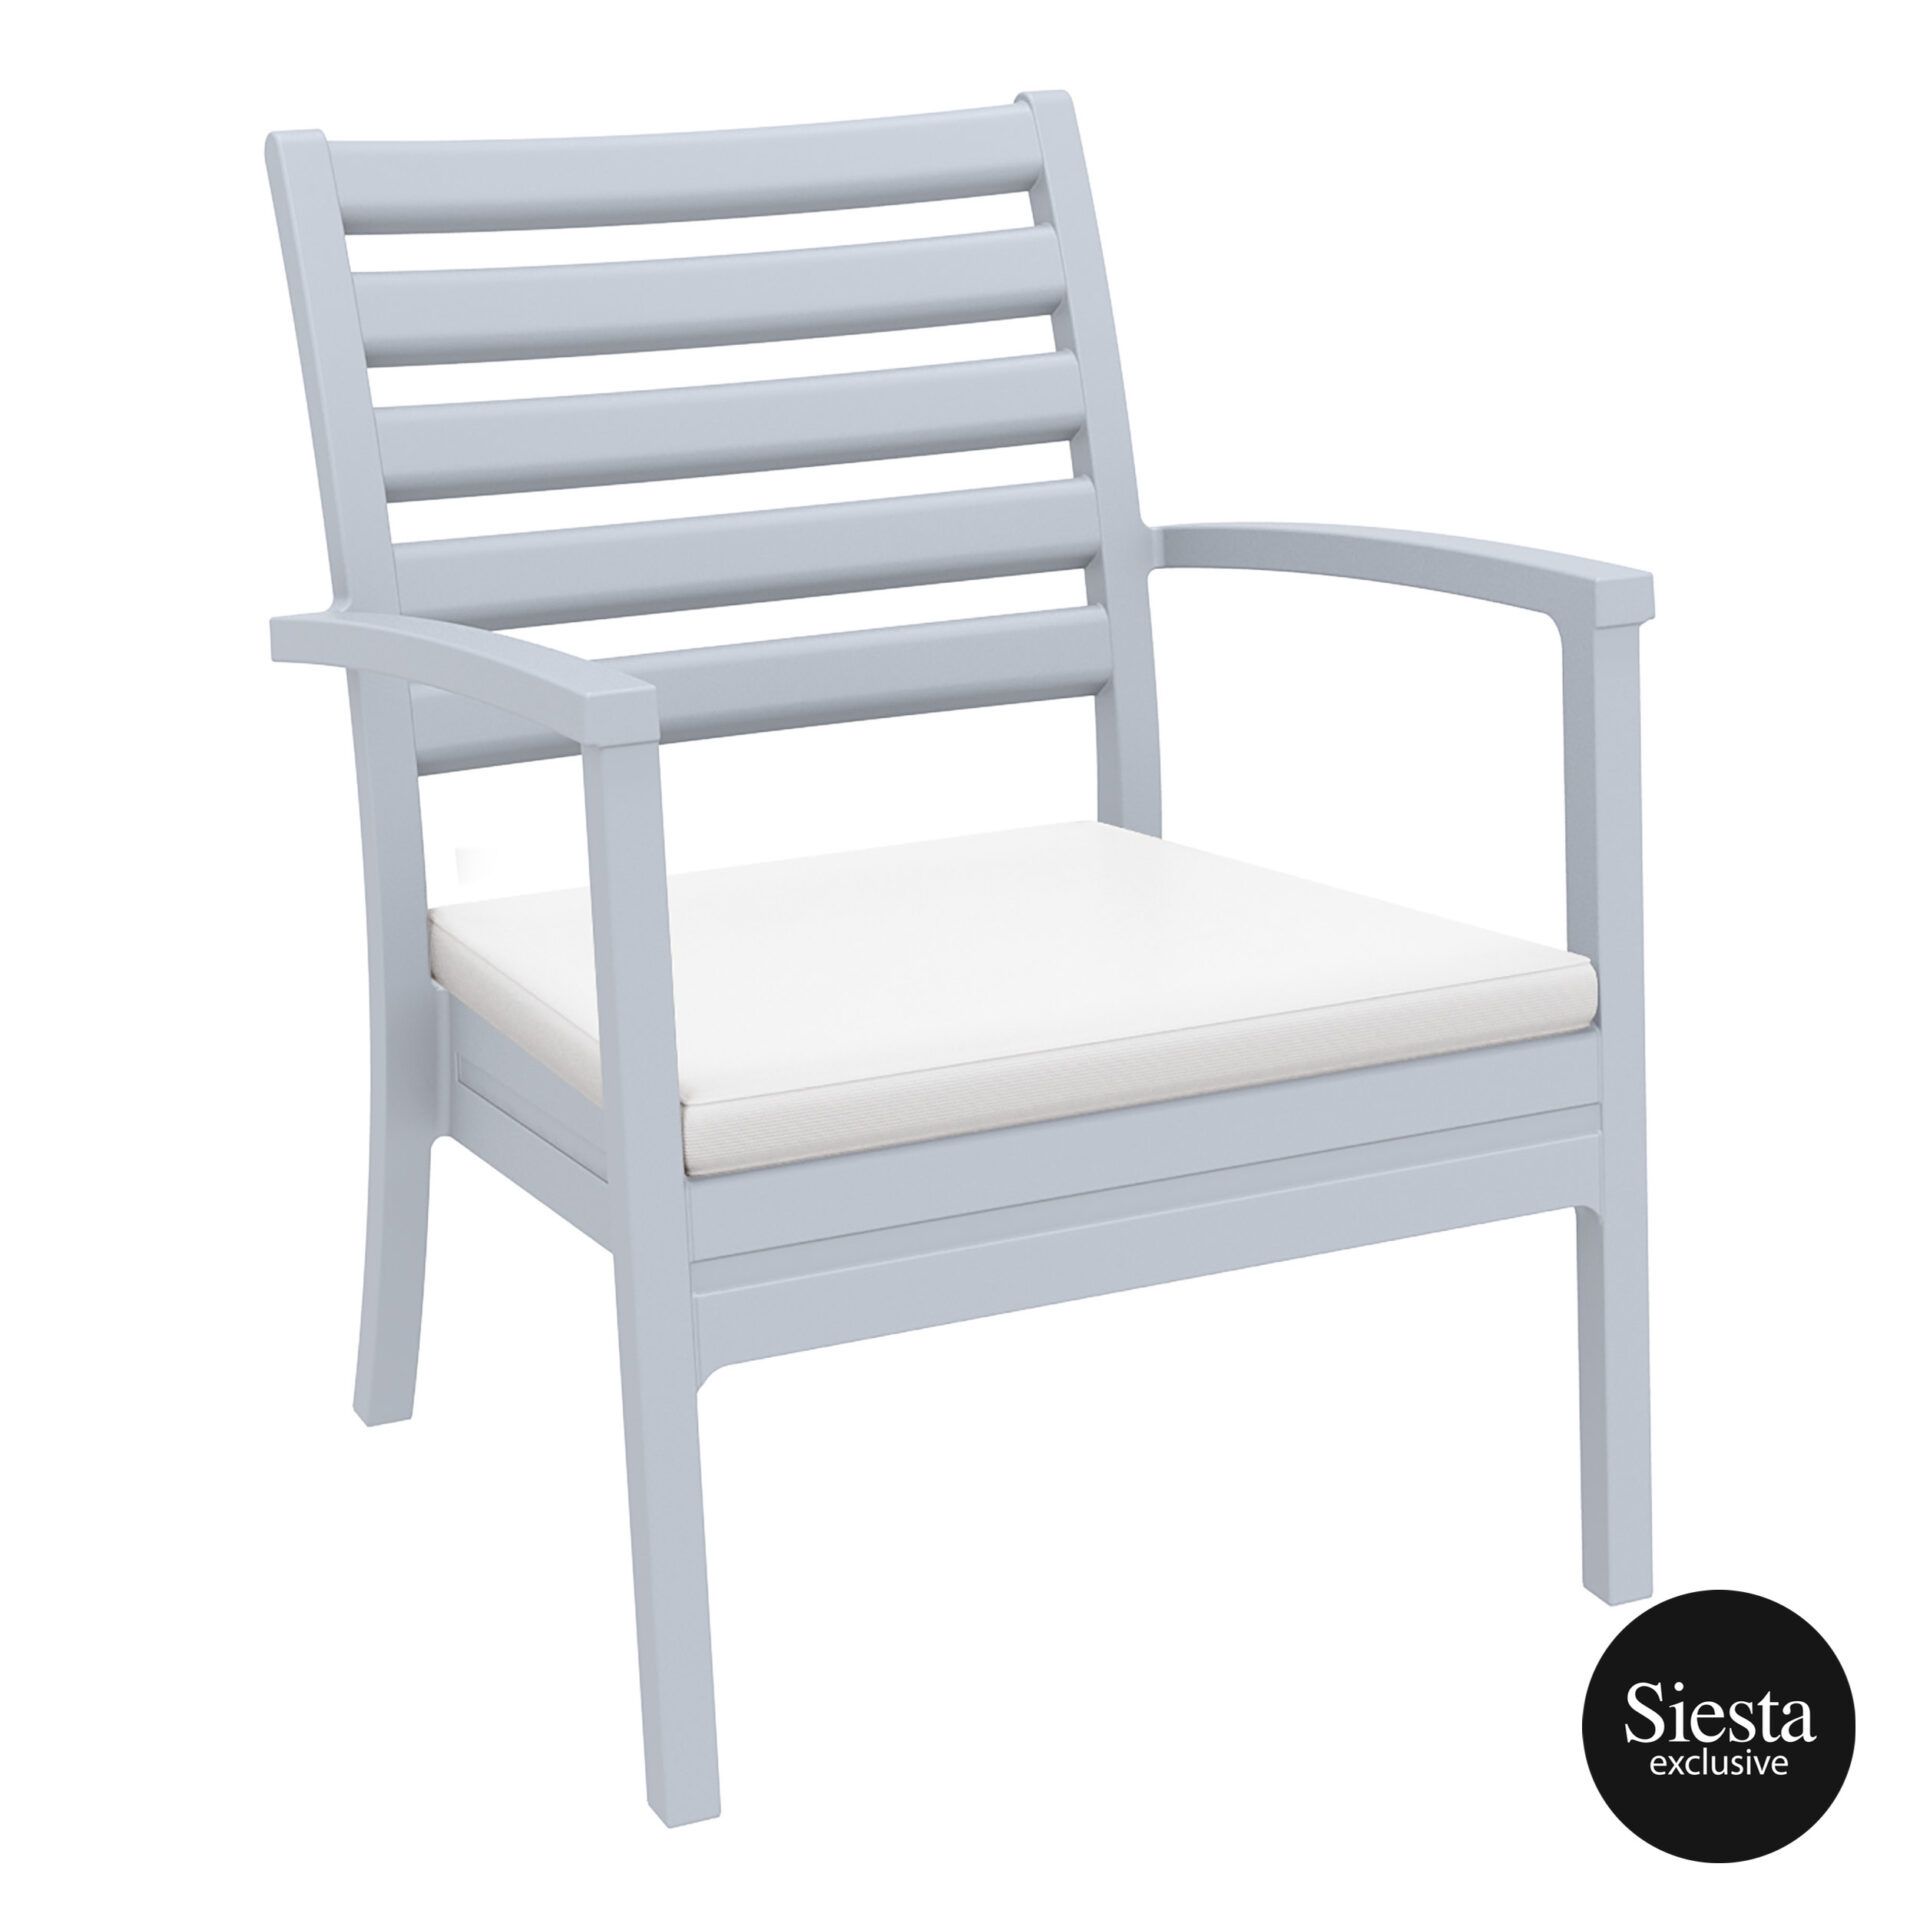 Artemis XL Armchair - Silver Grey with White Seat Cushion